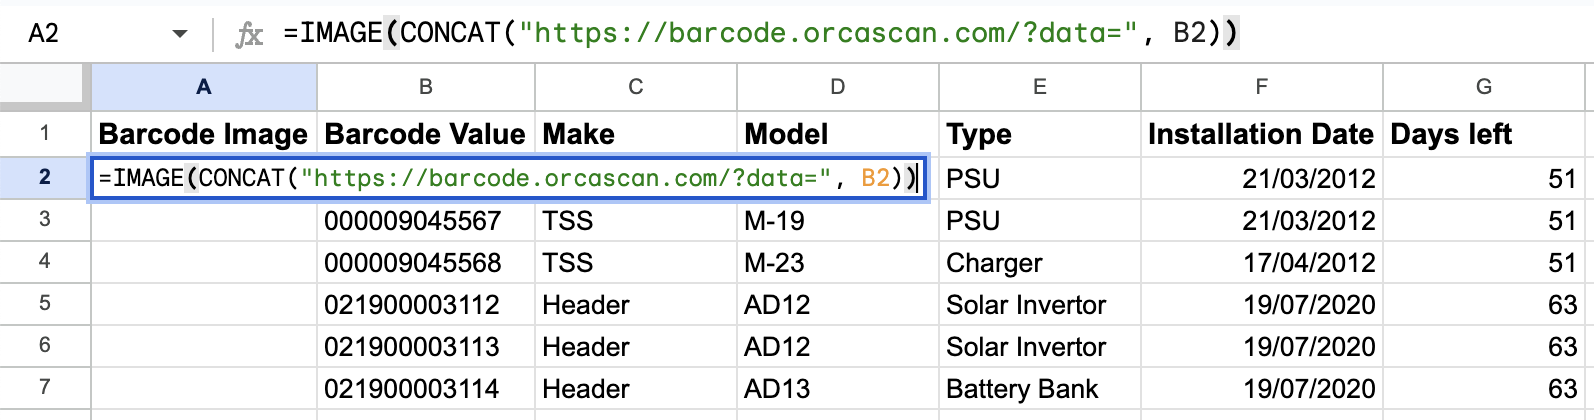 Add the formula to the ‘Barcode Image’ column